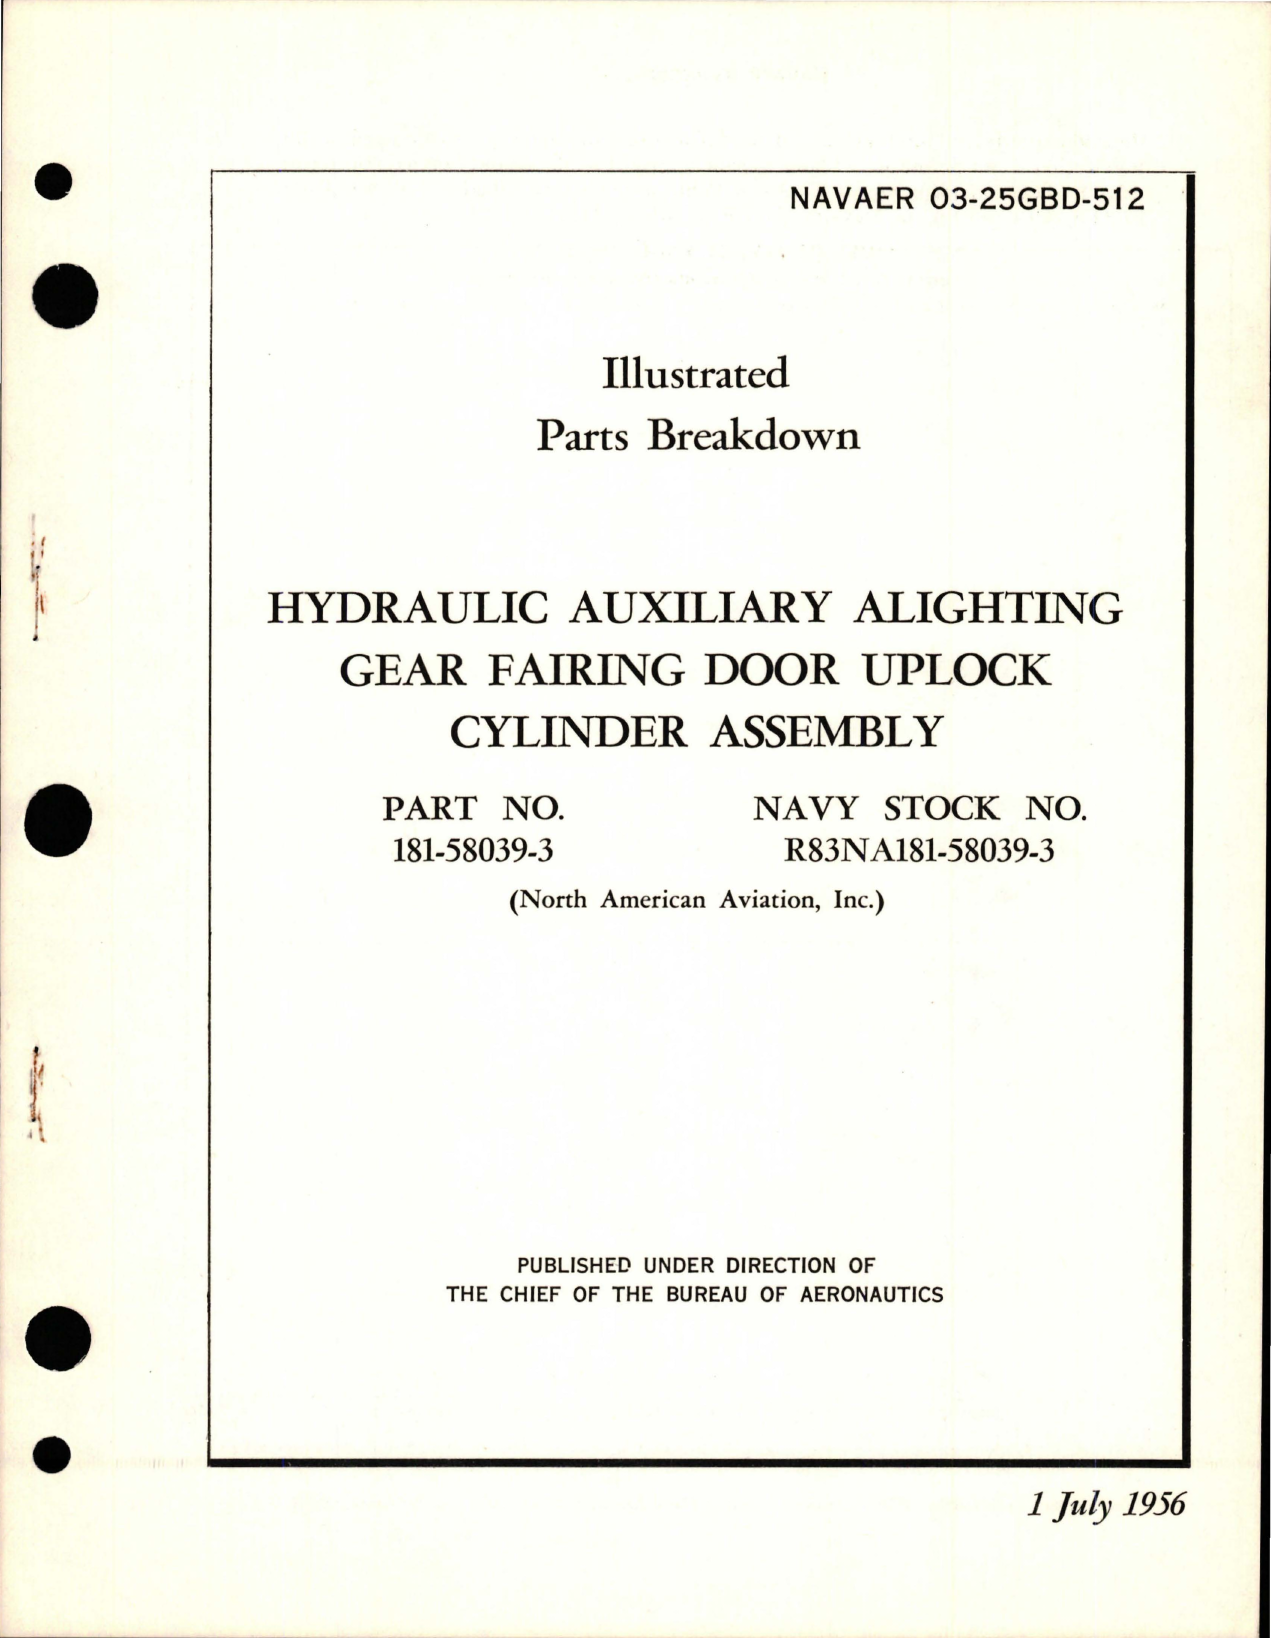 Sample page 1 from AirCorps Library document: Illustrated Parts Breakdown for Hydraulic Auxiliary Alighting Gear Fairing Door Uplock Cylinder Assembly - Part 181-58039-3 